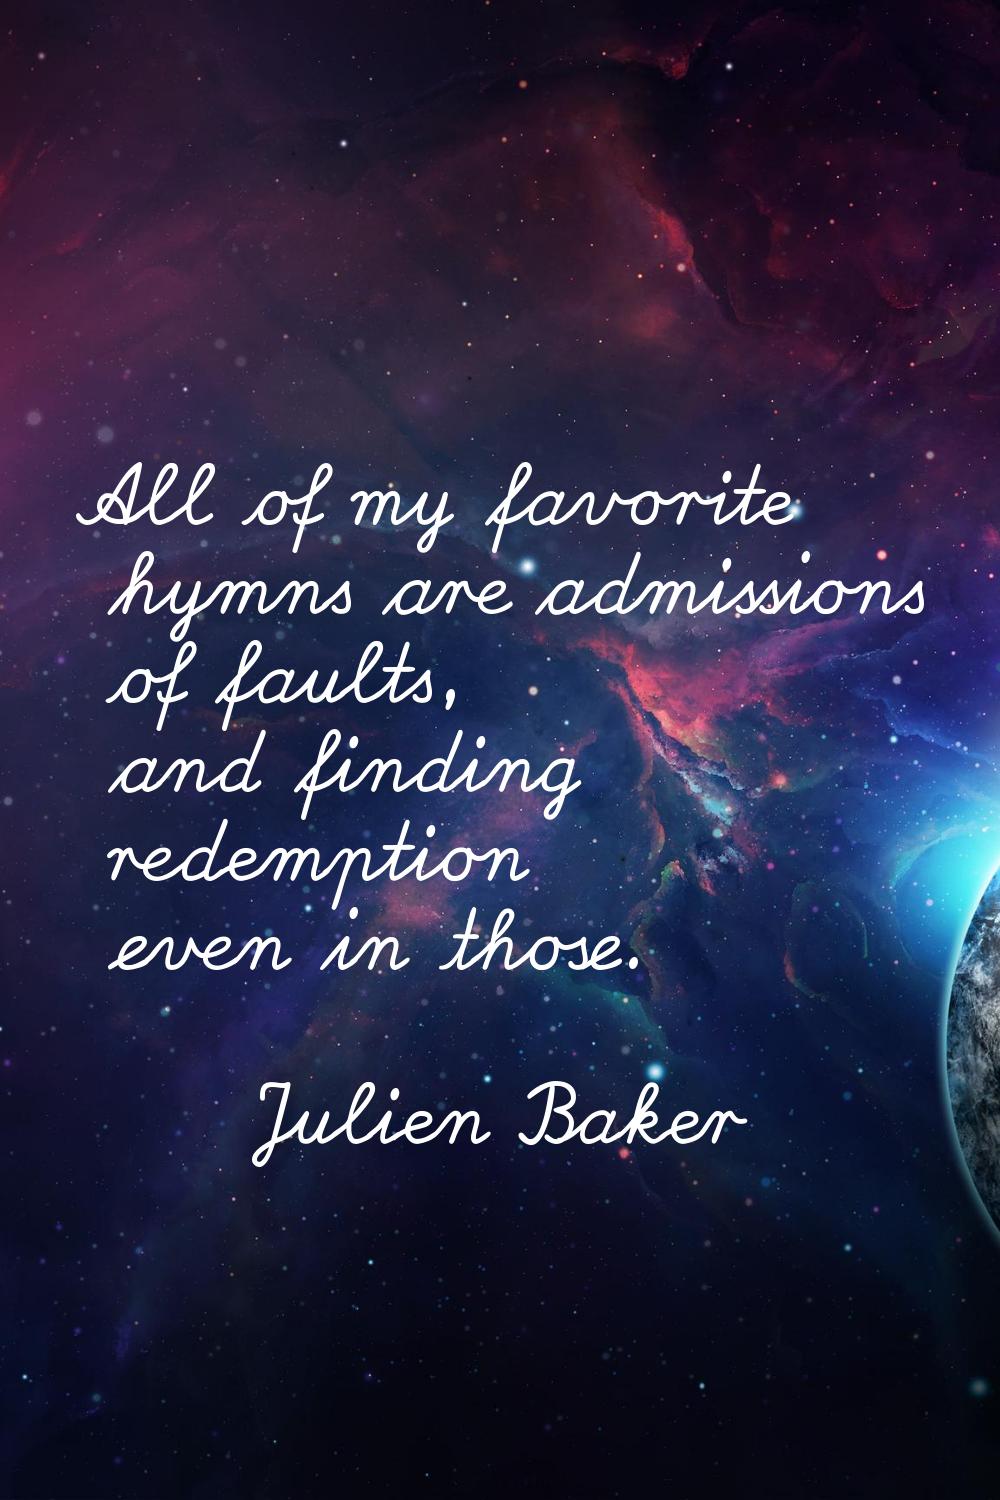 All of my favorite hymns are admissions of faults, and finding redemption even in those.